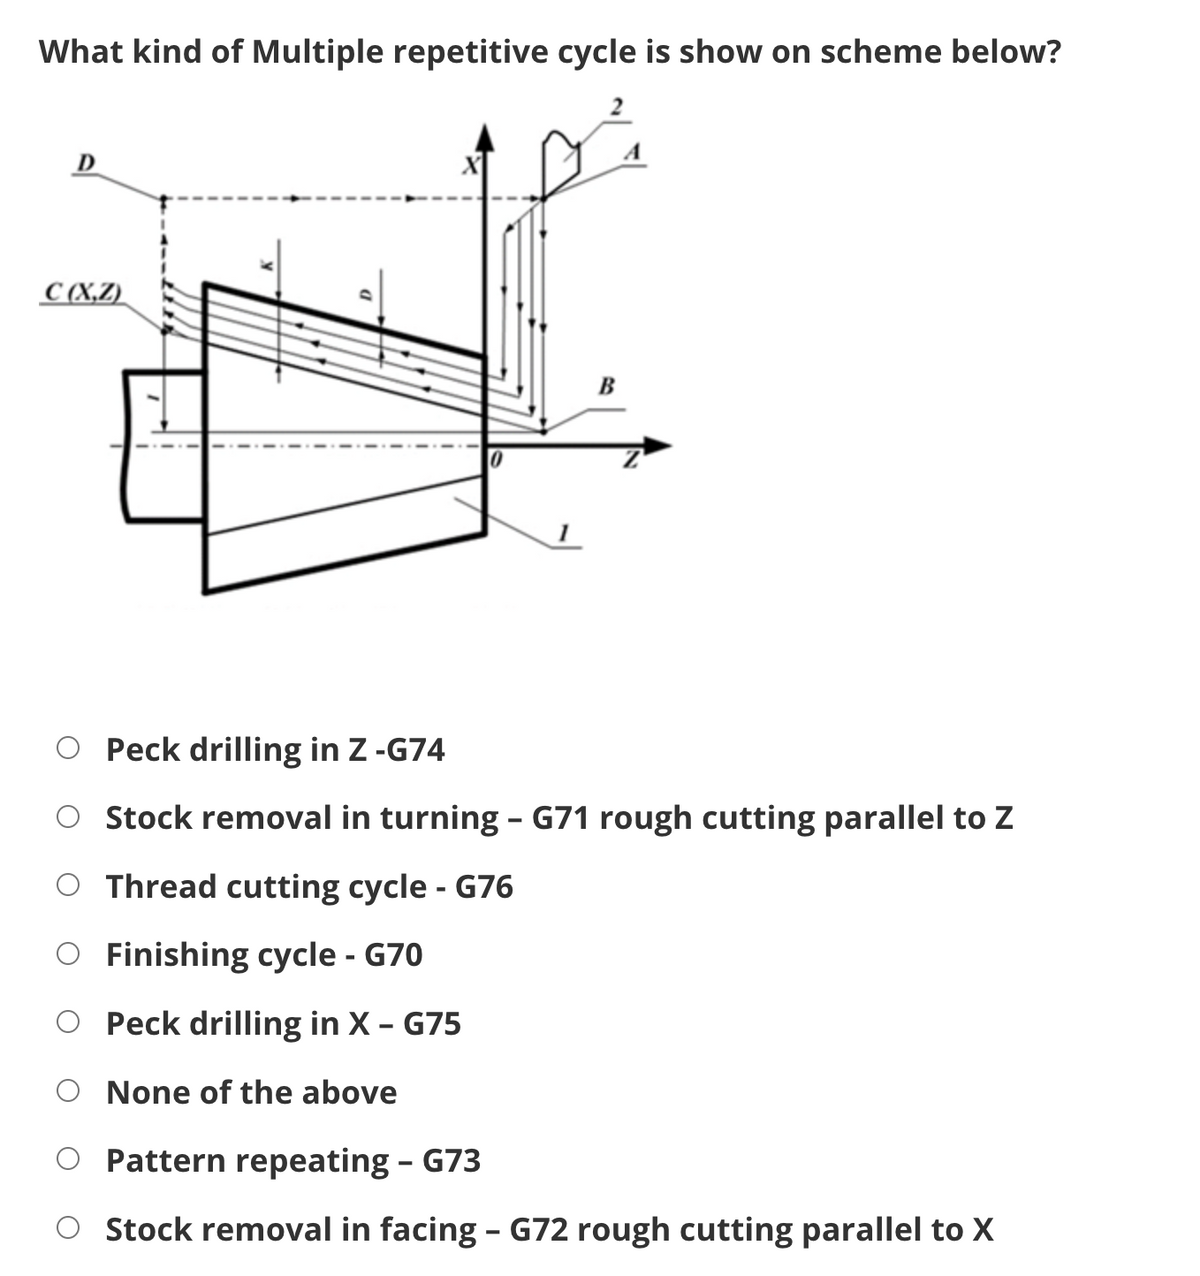 What kind of Multiple repetitive cycle is show on scheme below?
D
C (X,Z)
0
B
Peck drilling in Z-G74
Stock removal in turning - G71 rough cutting parallel to Z
Thread cutting cycle - G76
Finishing cycle - G70
O Peck drilling in X-G75
O None of the above
O Pattern repeating - G73
O Stock removal in facing - G72 rough cutting parallel to X